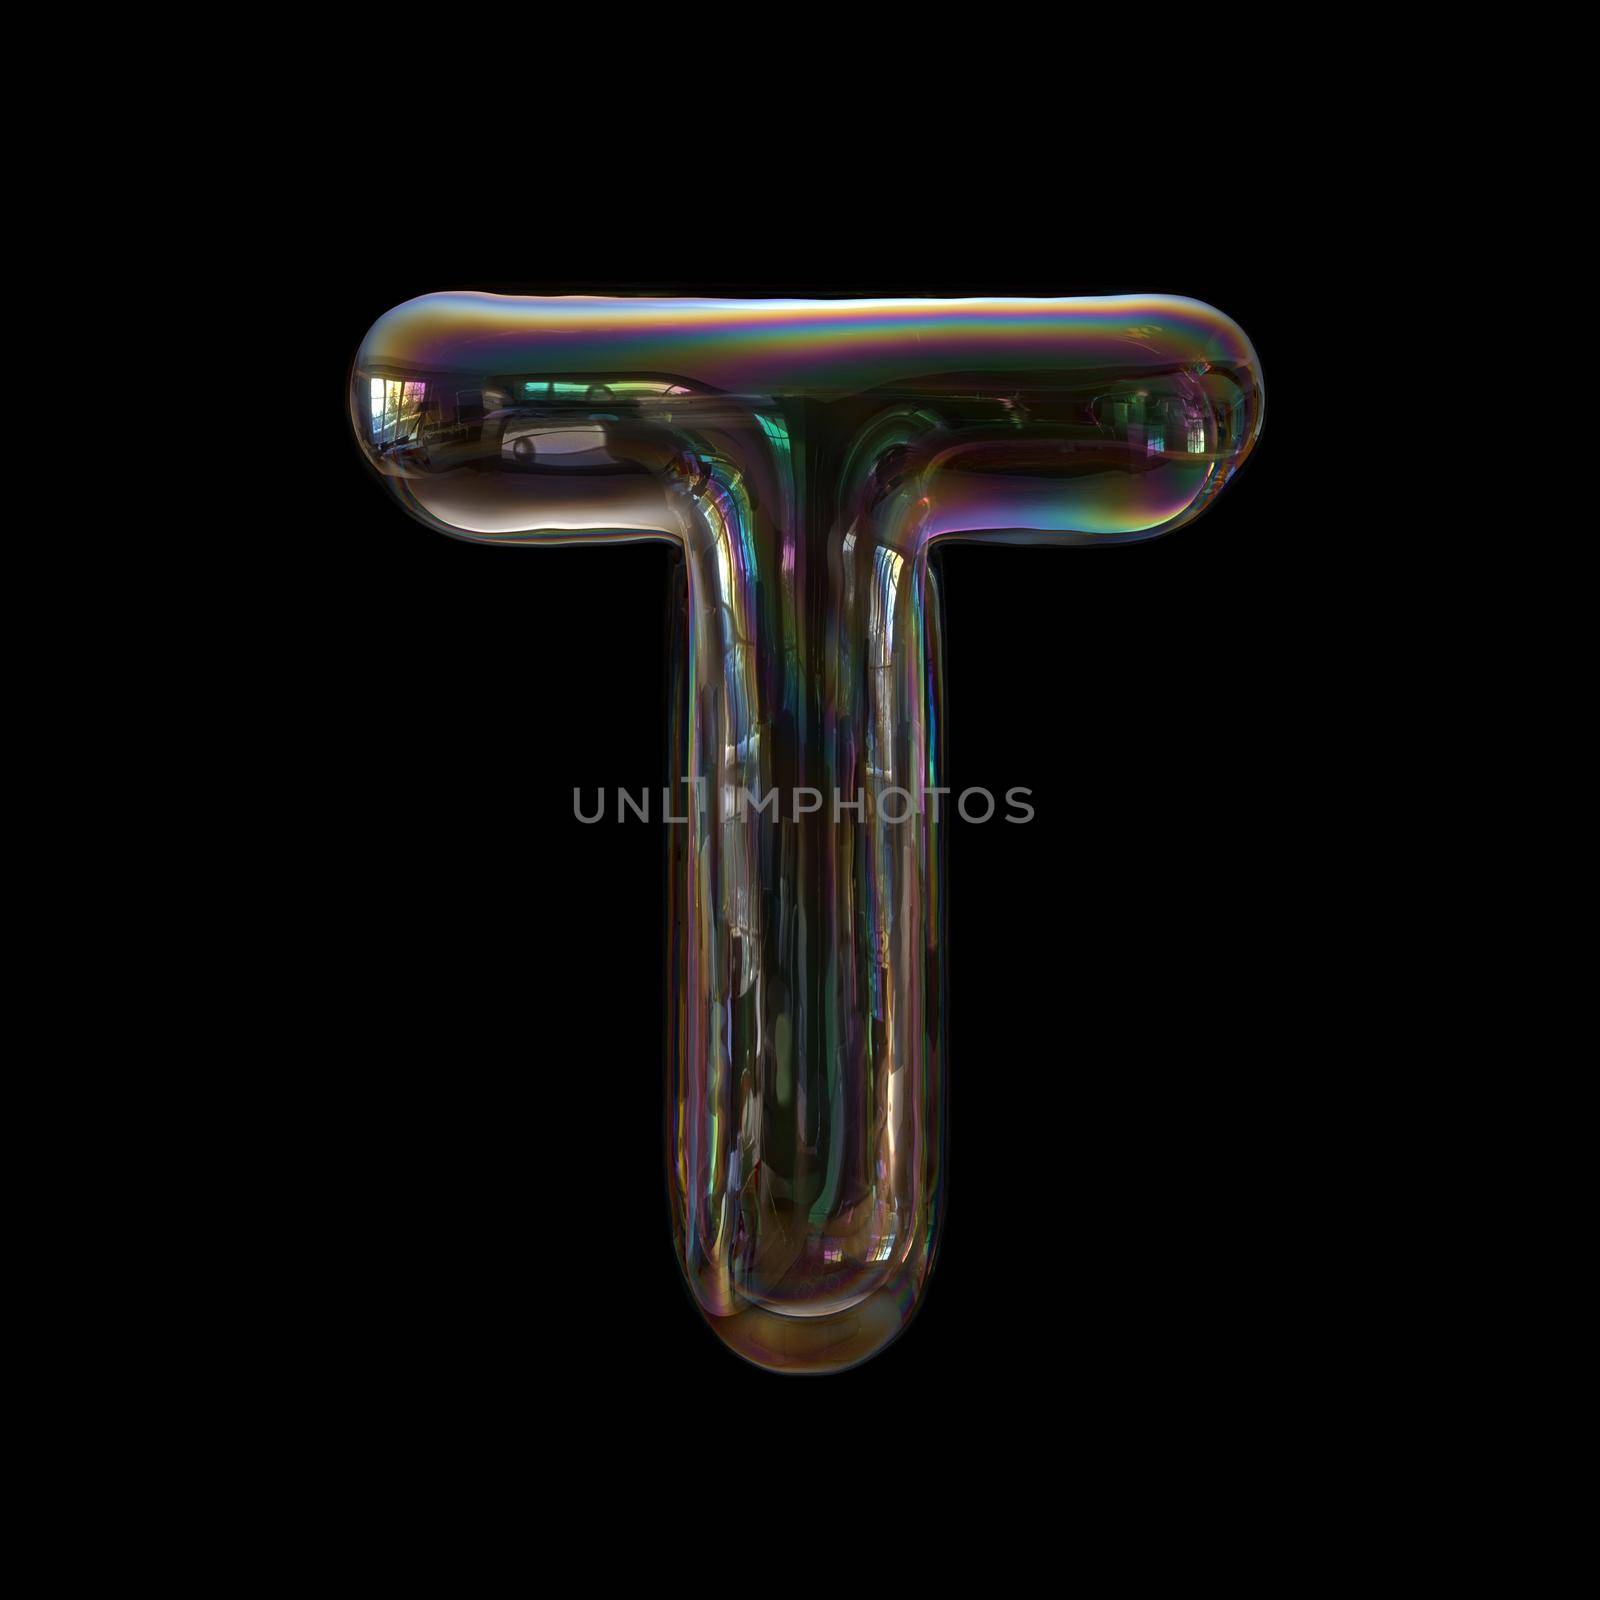 soap bubble character T - Uppercase 3d letter by chrisroll